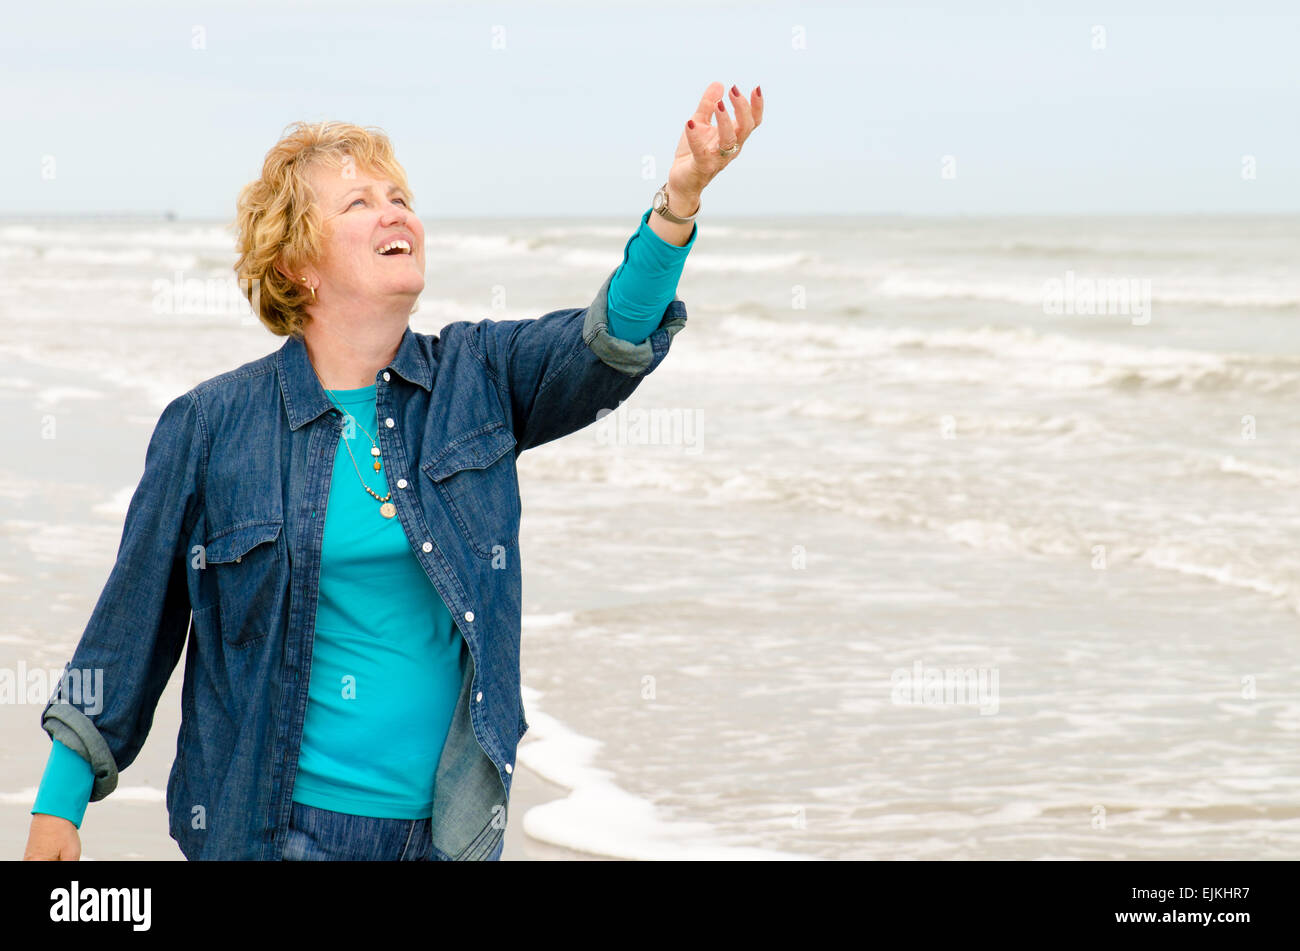 Woman on the beach with her arm outstretched upward Stock Photo